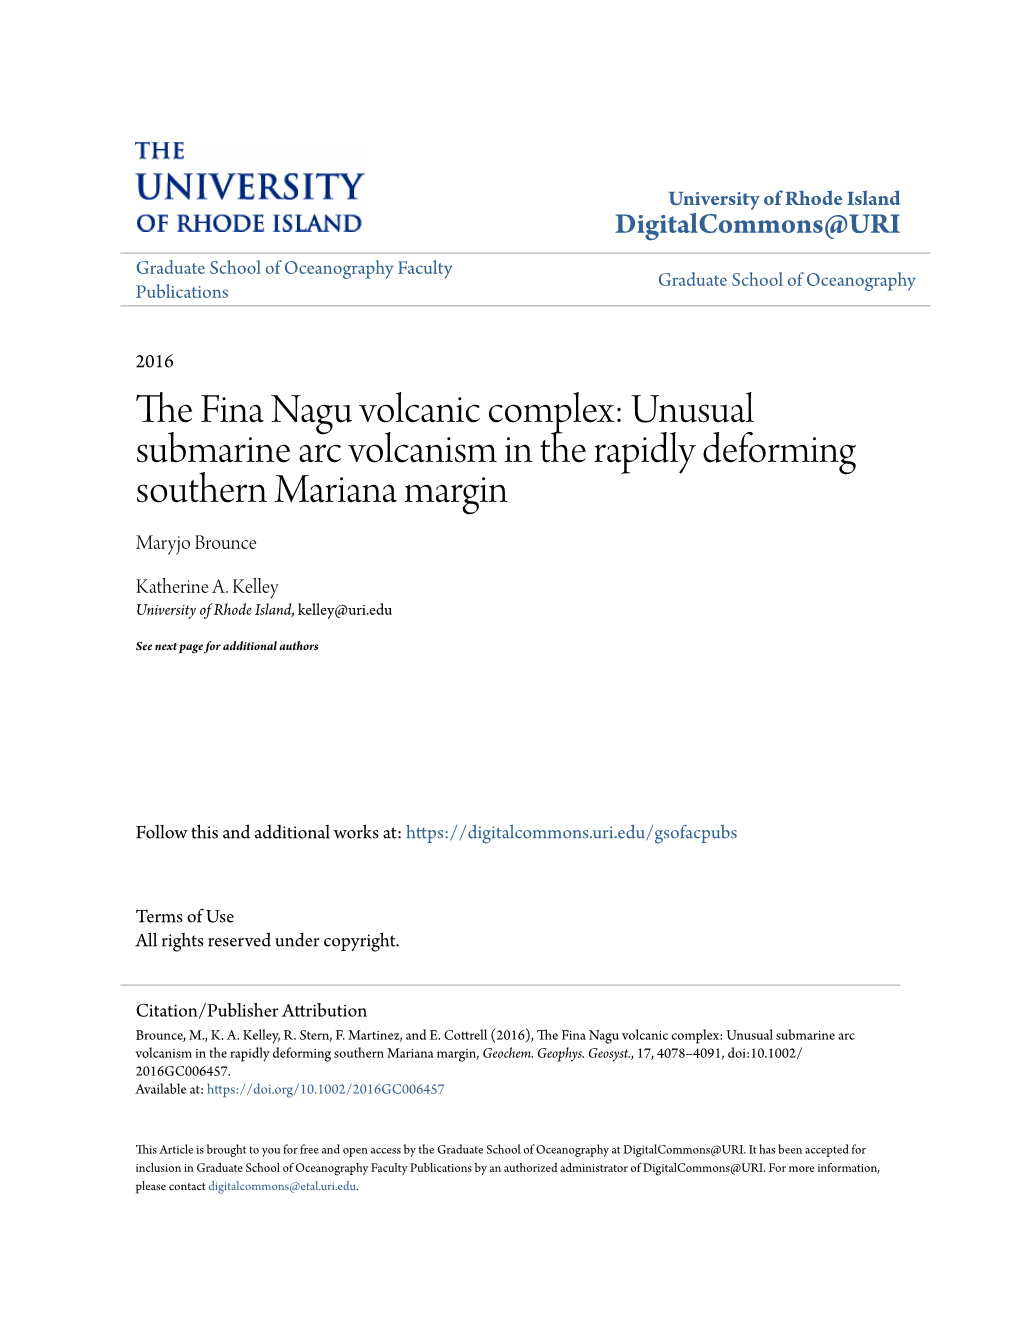 The Fina Nagu Volcanic Complex: Unusual Submarine Arc 10.1002/2016GC006457 Volcanism in the Rapidly Deforming Southern Mariana Margin